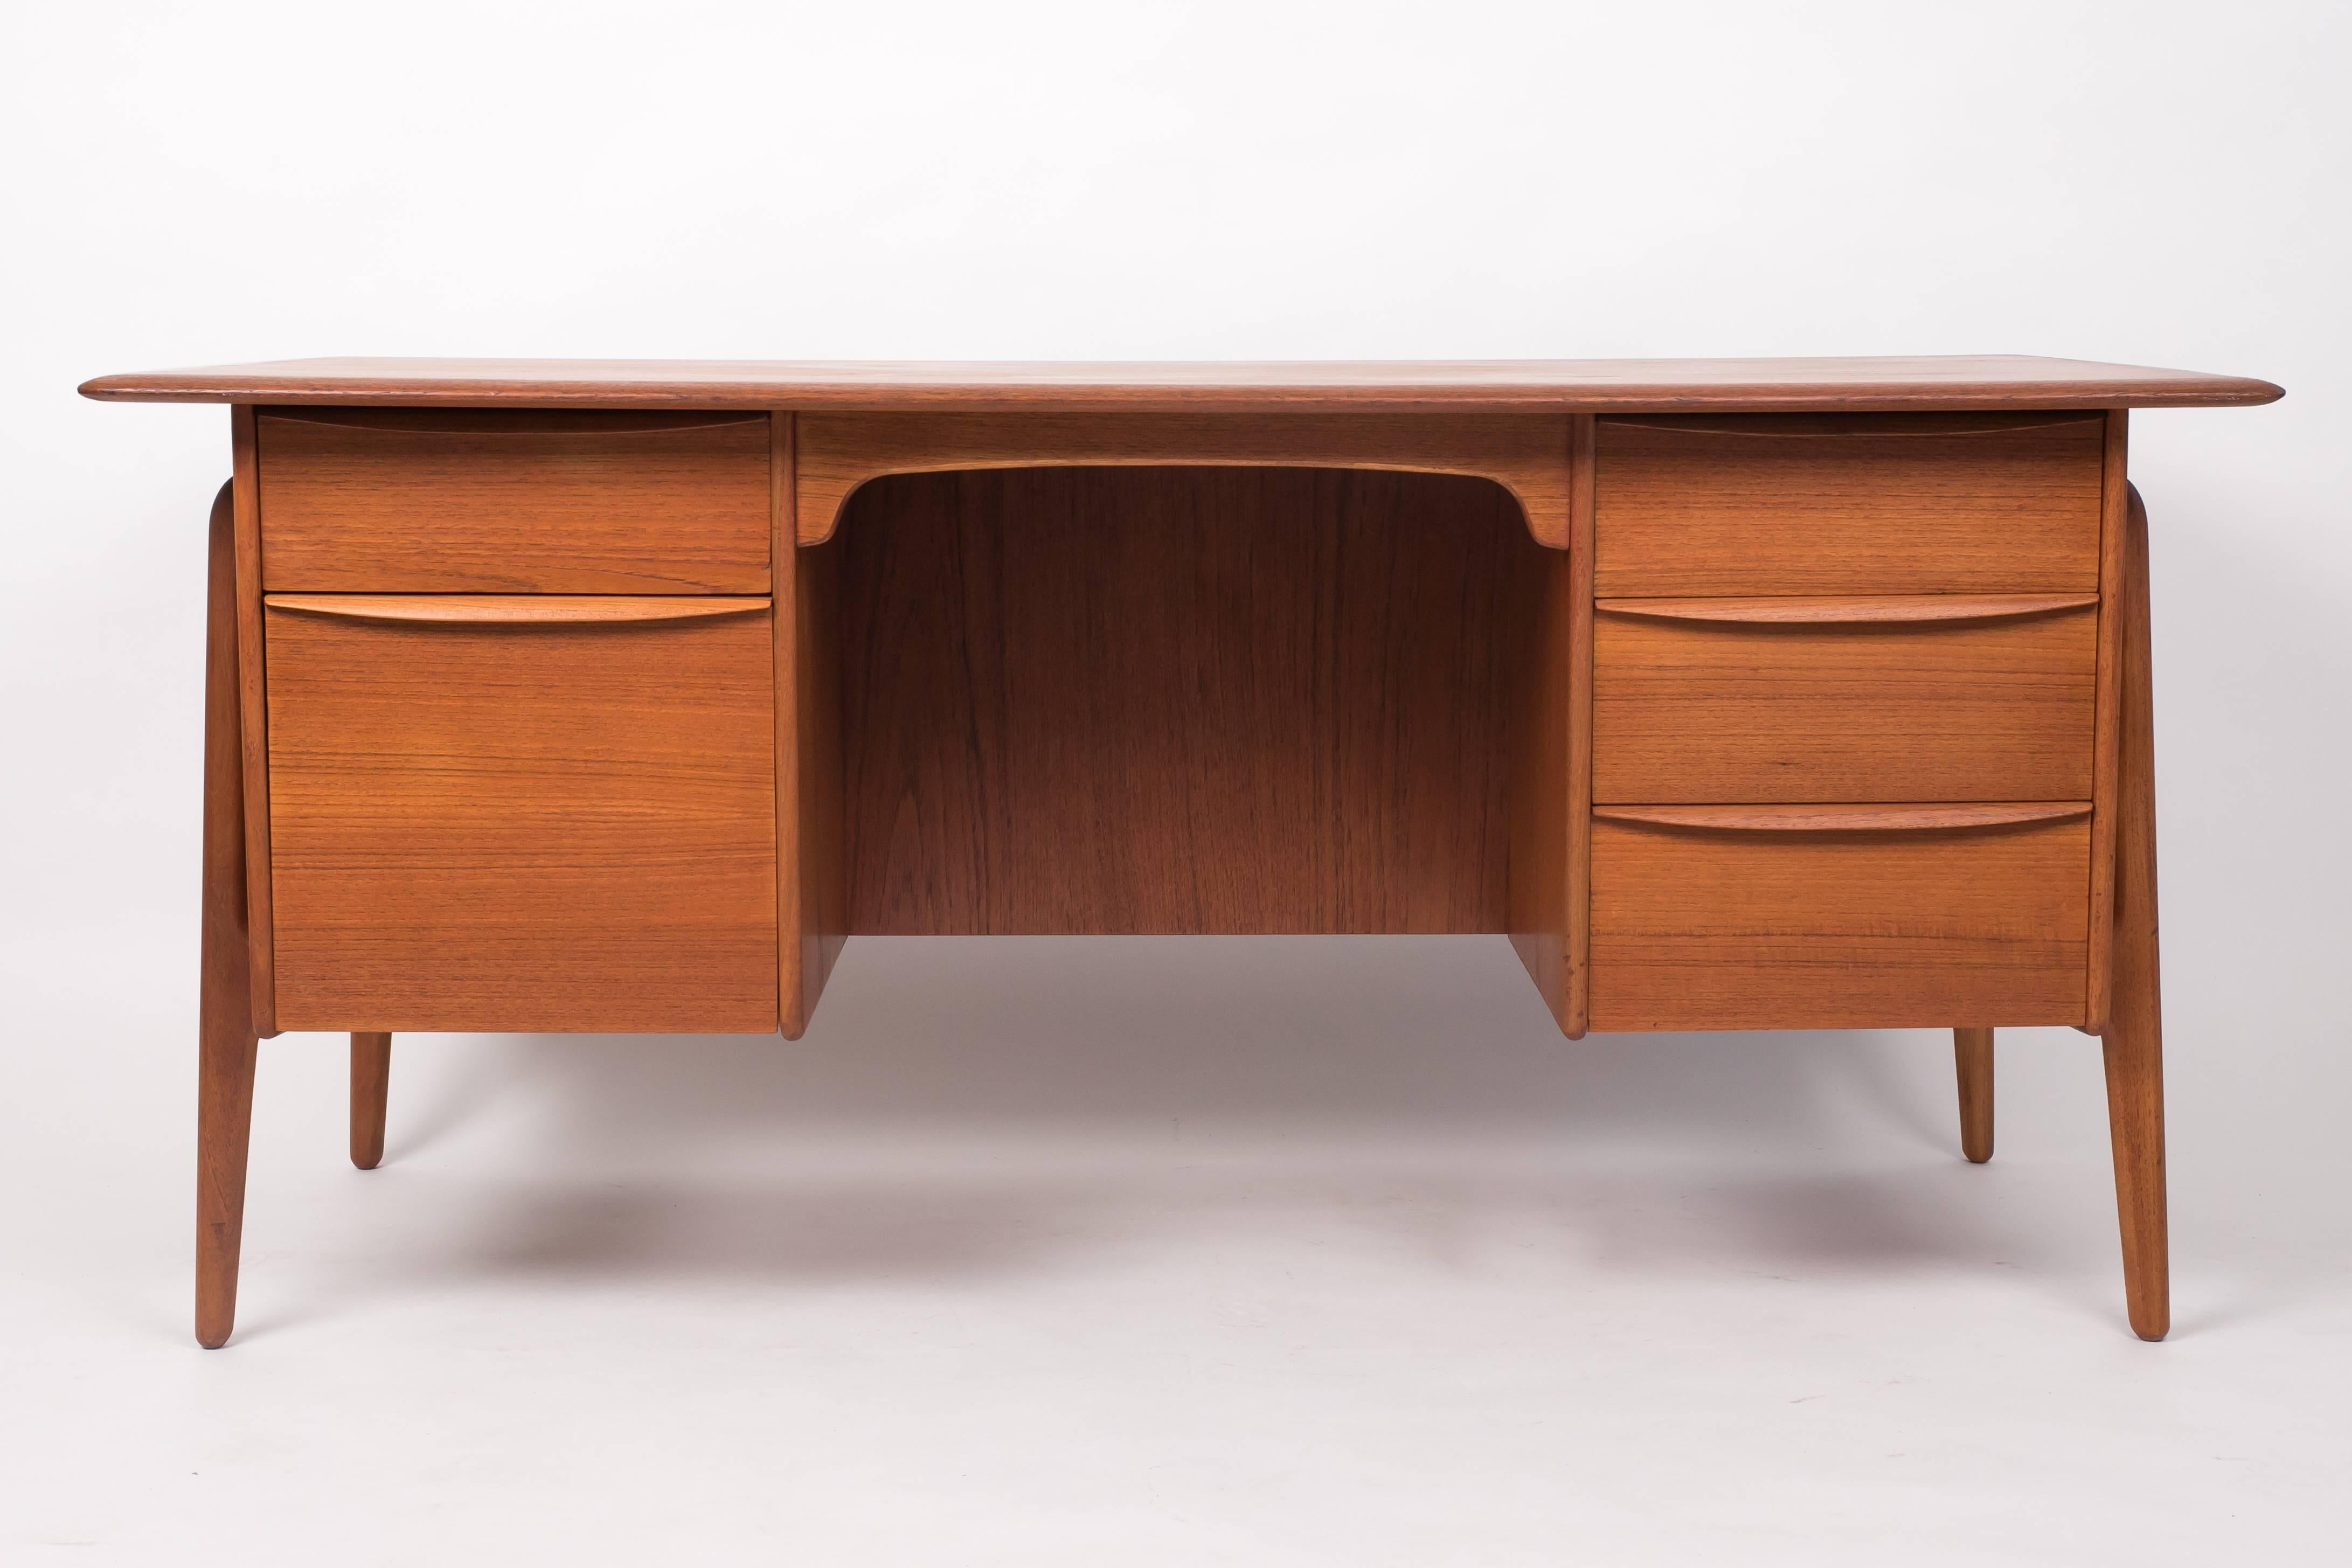 Classic Danish teak executive desk with twin drawer stacks and a broad writing surface. This piece, designed by Svend Åage Madsen for Sigurd Hansen is distinguished by the bookcase that runs lengthwise along its back panel and the end-pieces of